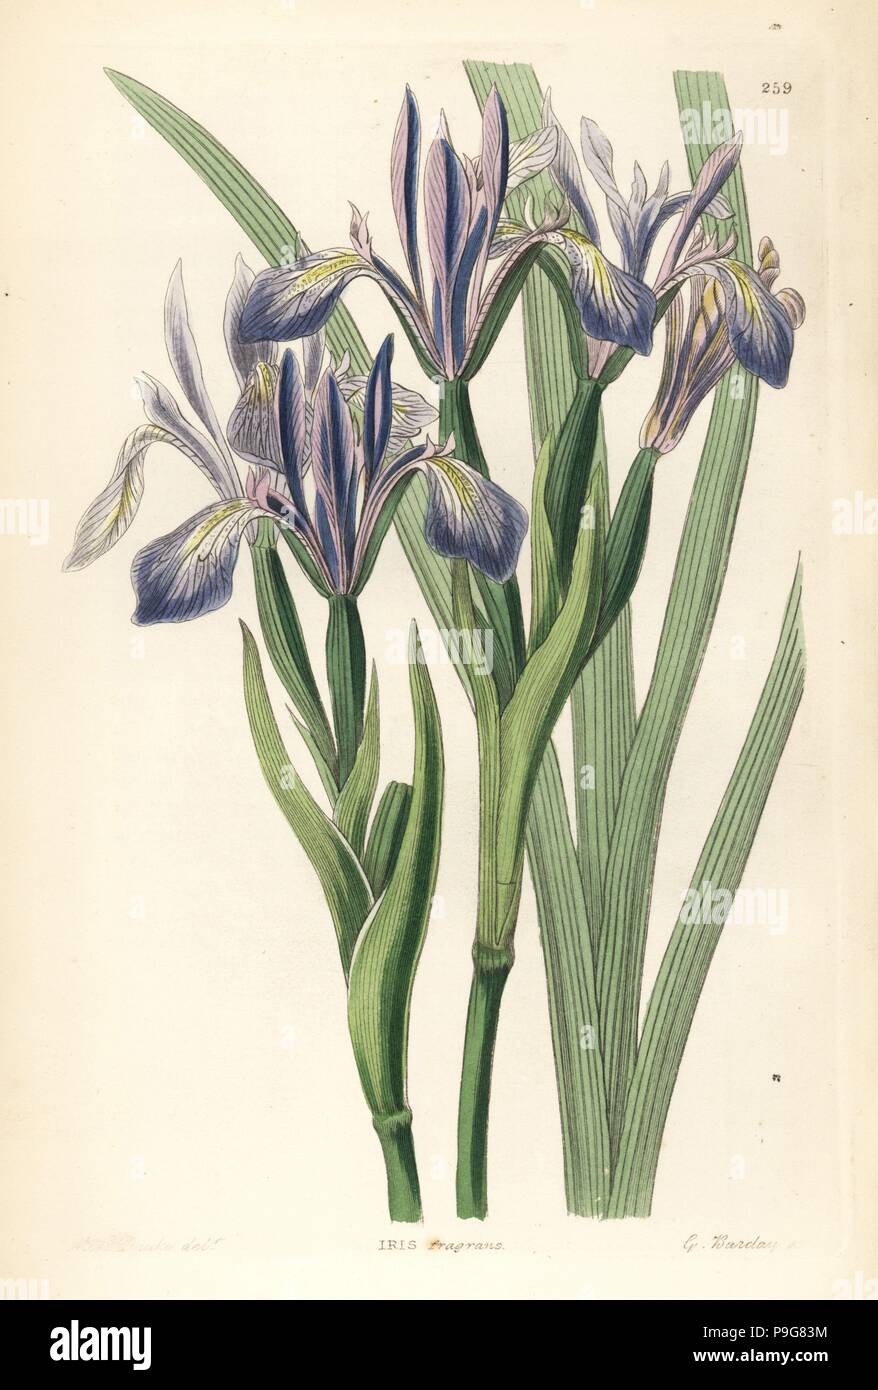 White-flowered iris or milky iris, Iris lactea (sweet-scented flower de luce, Iris fragrans). Handcoloured copperplate engraving by G. Barclay after Edwin Dalton Smith from John Lindley and Robert Sweet's Ornamental Flower Garden and Shrubbery, G. Willis, London, 1854. Stock Photo